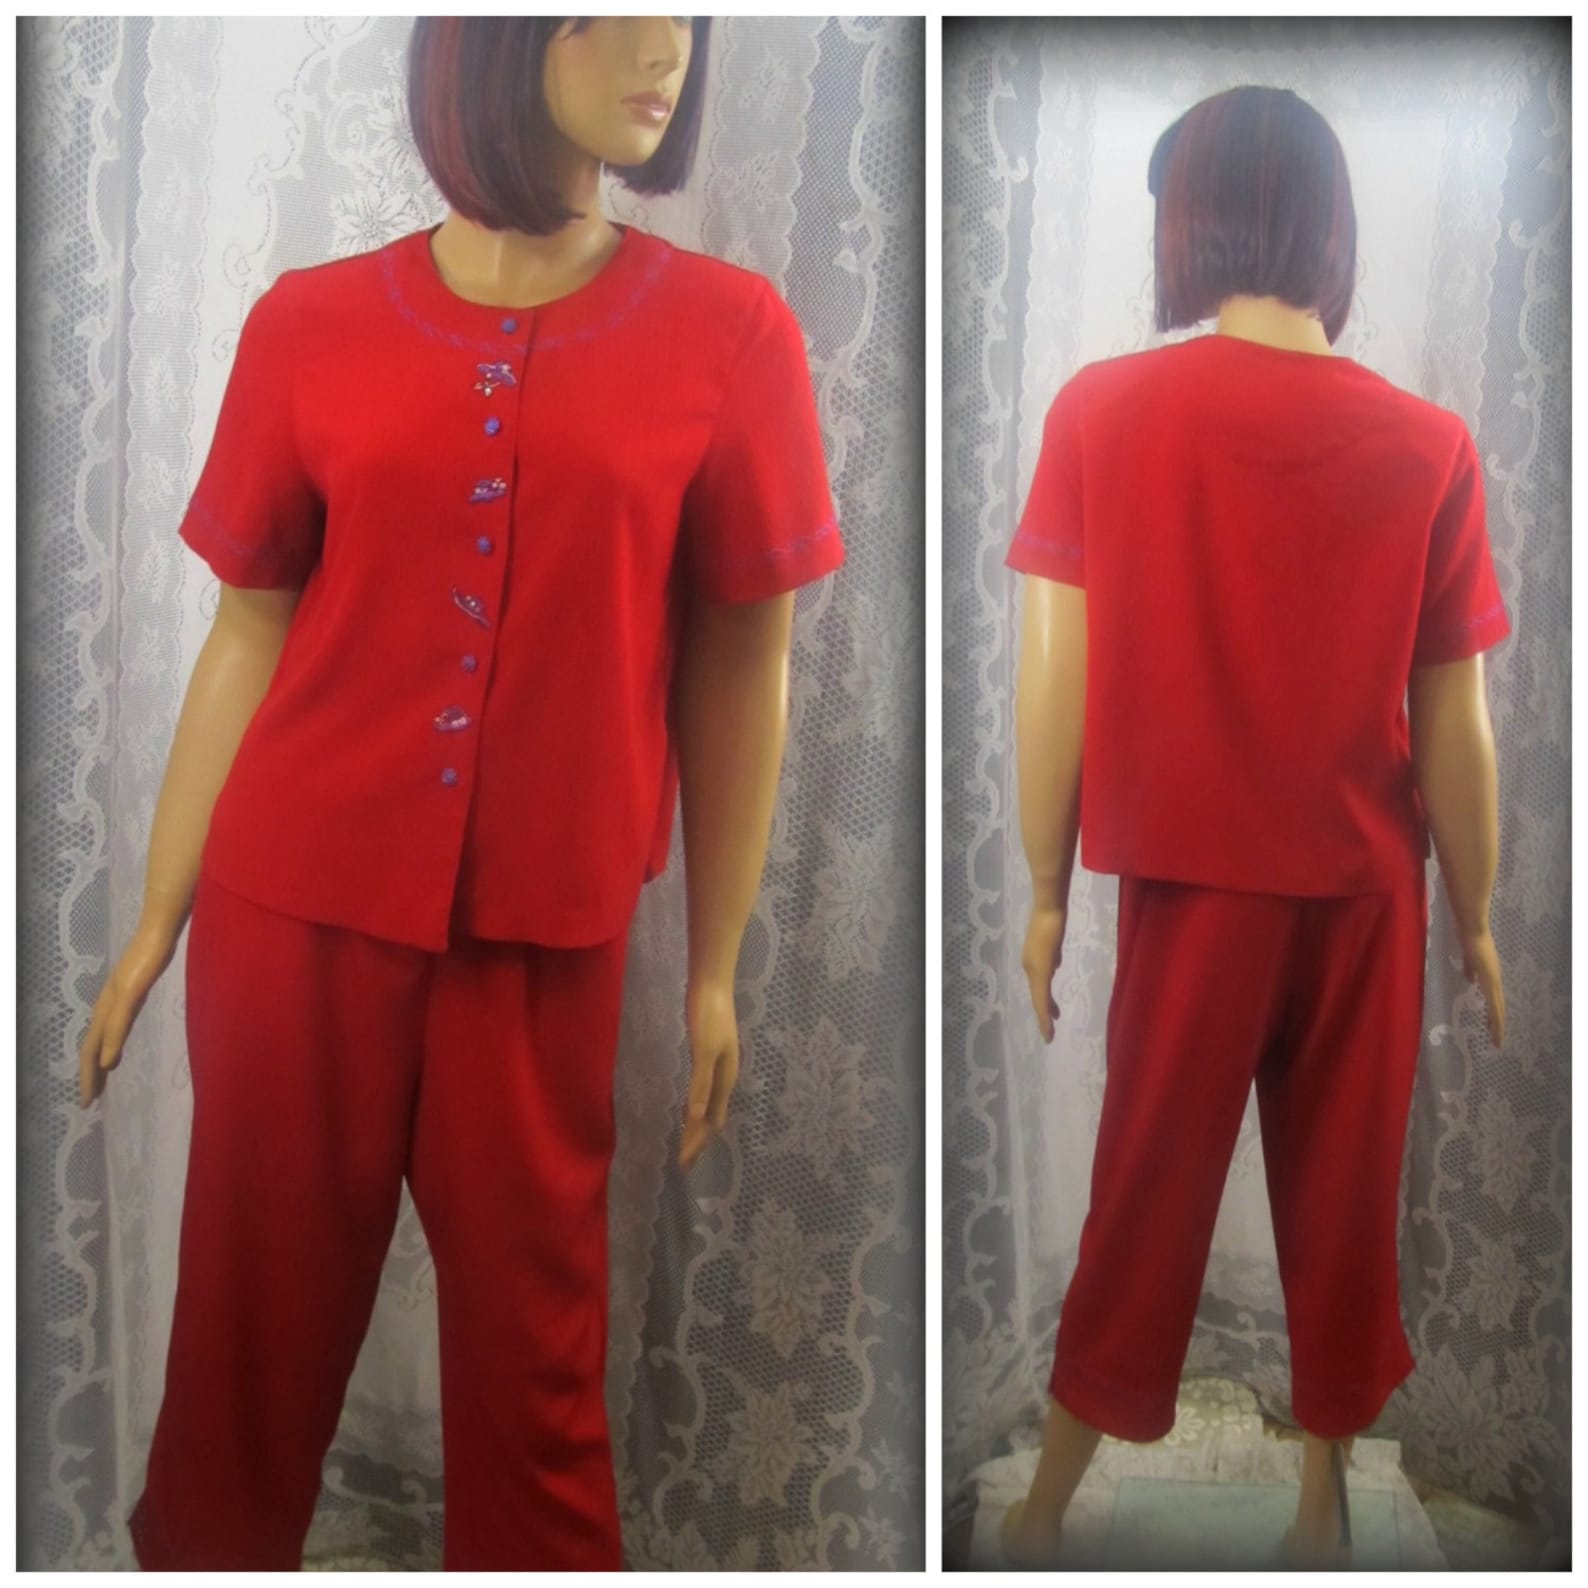 Women's Red Hat Society Clothing, Red Outfit, Women's Size 10 Petite ...